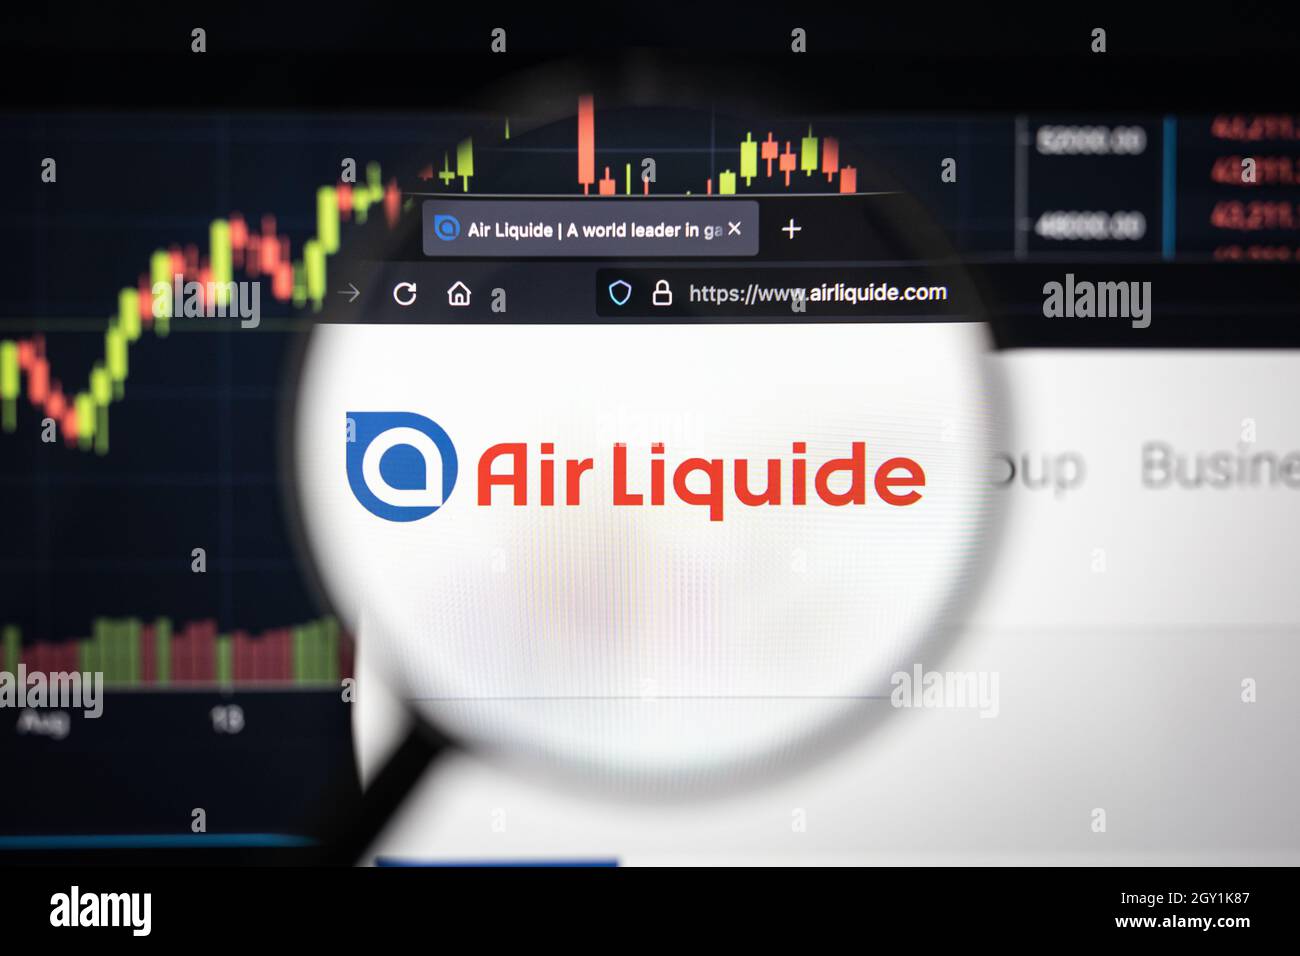 Air Liquide company logo on a website with blurry stock market developments in the background, seen on a computer screen through a magnifying glass Stock Photo